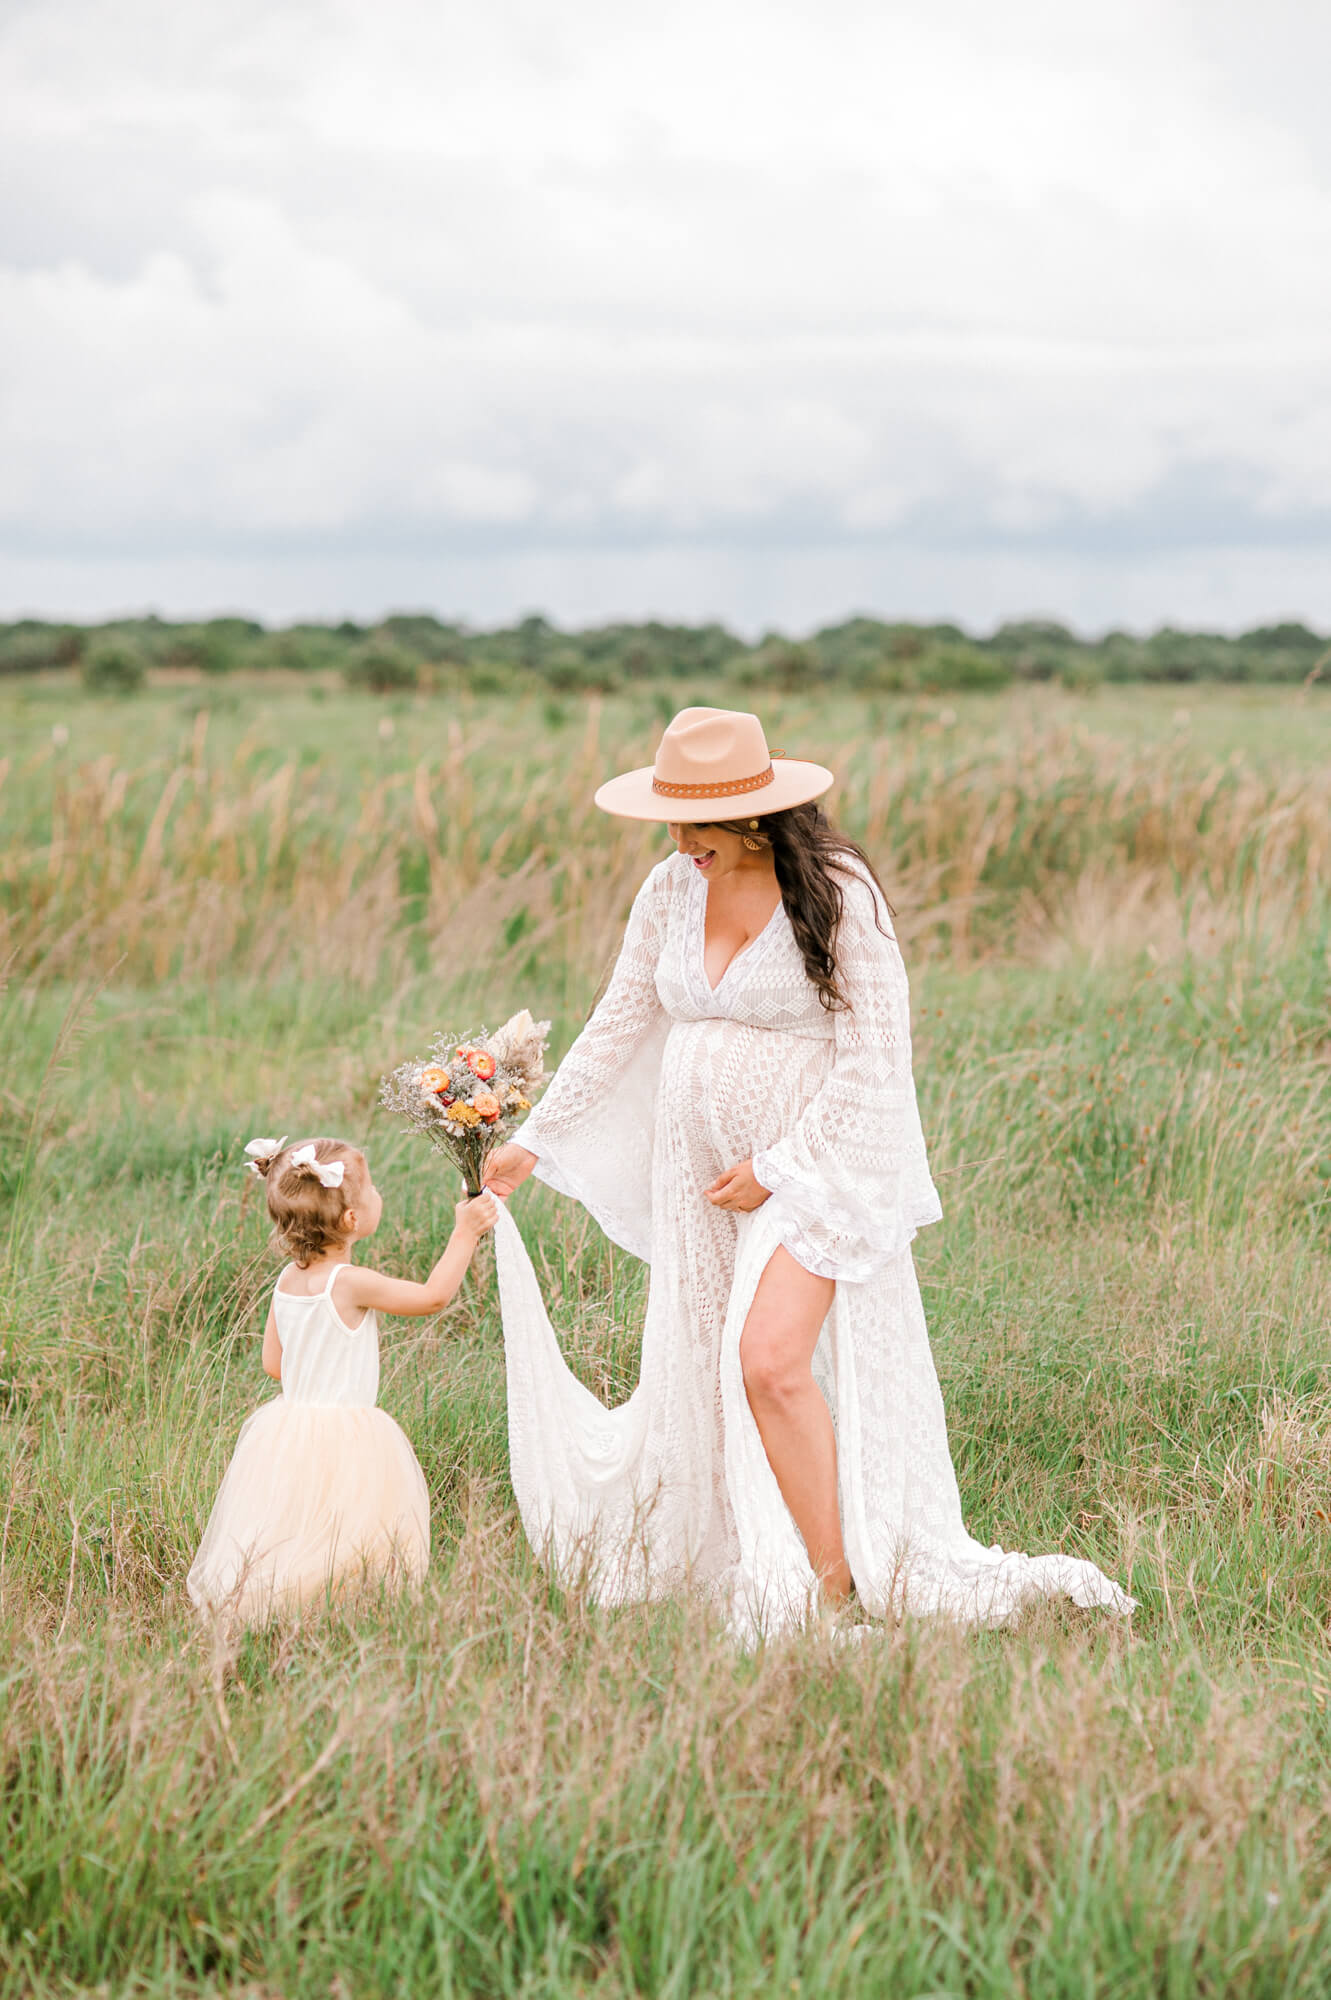 Toddler girl hands mom a bouquet wildflowers in a field during the moms maternity session.